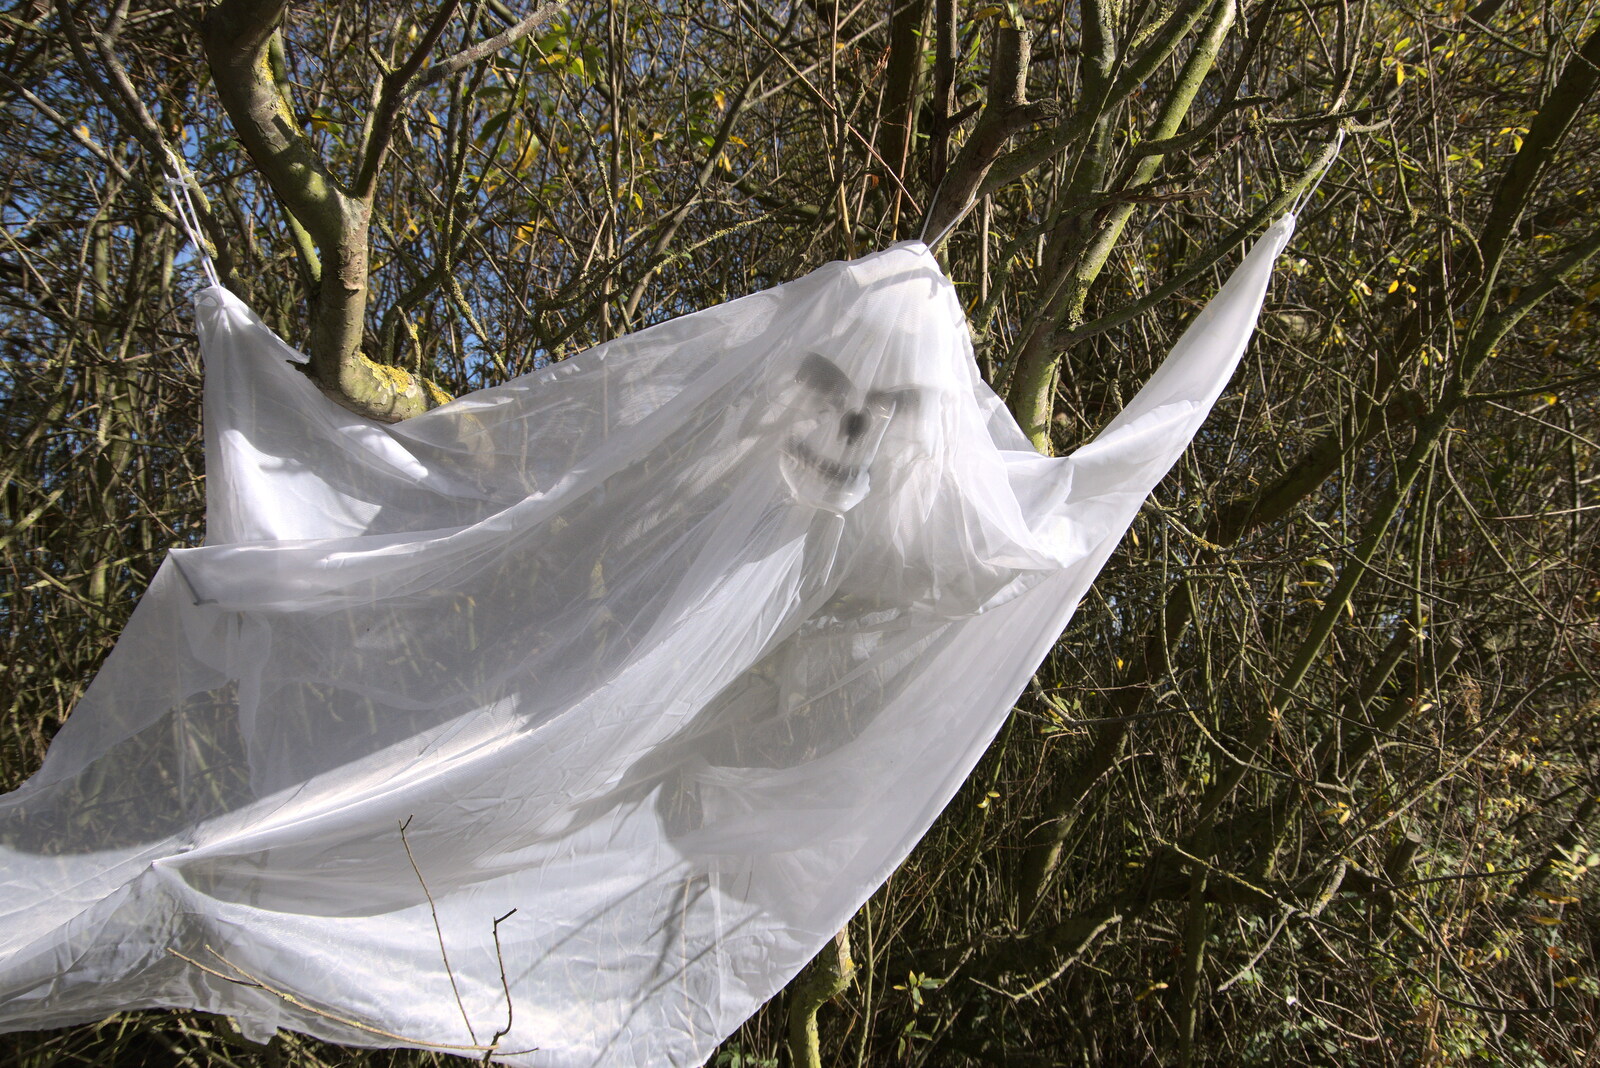 A Few Hours at Alton Water, Stutton, Suffolk - 22nd October 2022: There's a cool ghoul in a bush